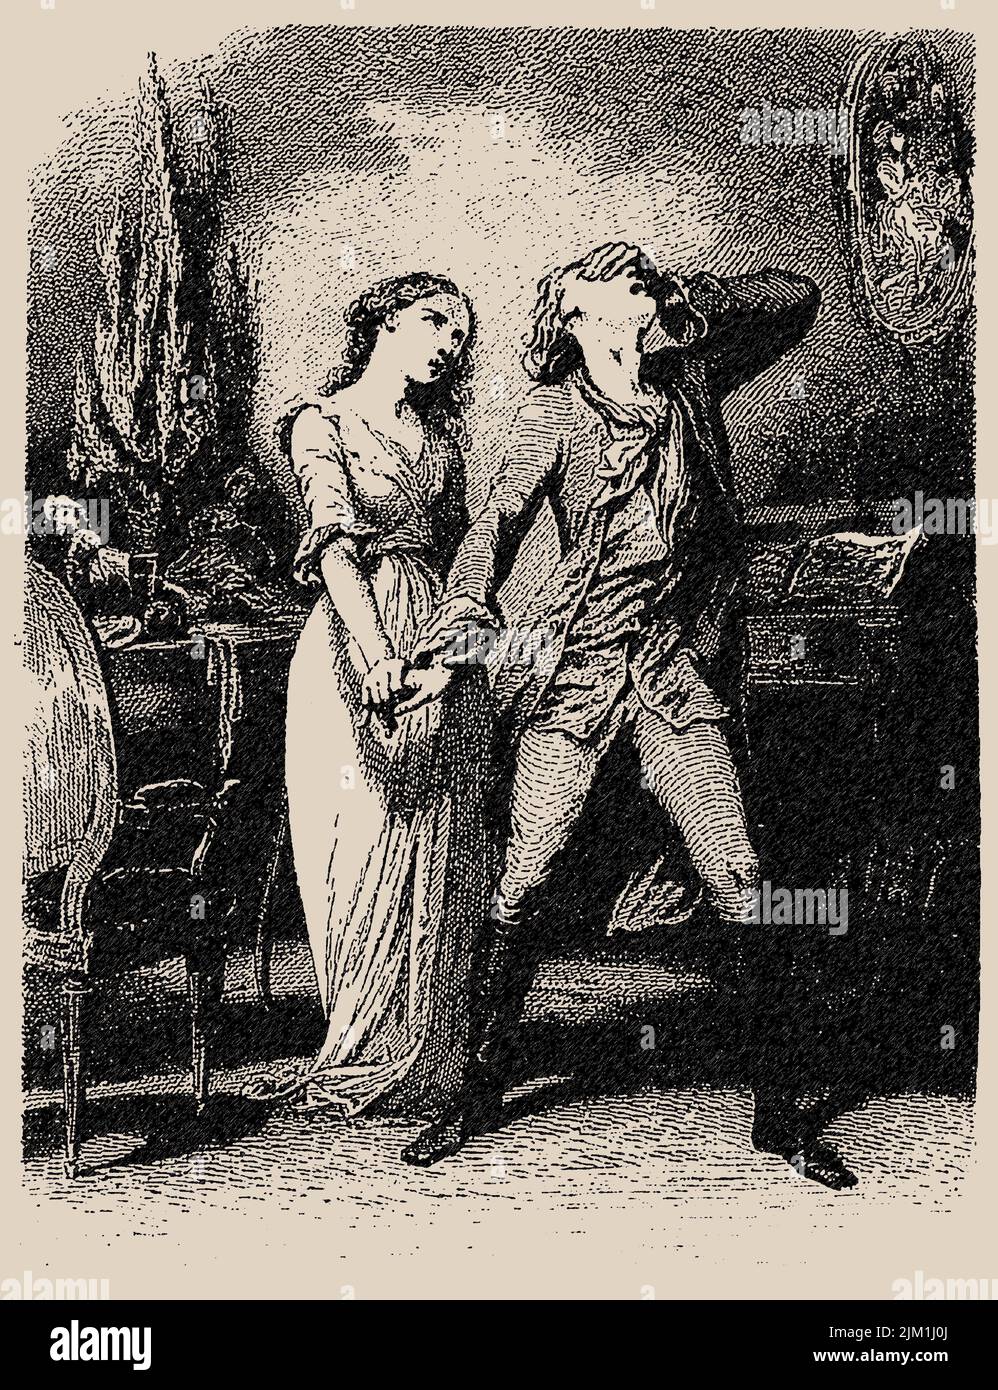 Illustration for Das Leiden des jungen Werthers (The Sorrows Of Young Werther), by Goethe. Museum: PRIVATE COLLECTION. Author: TONY JOHANNOT. Stock Photo